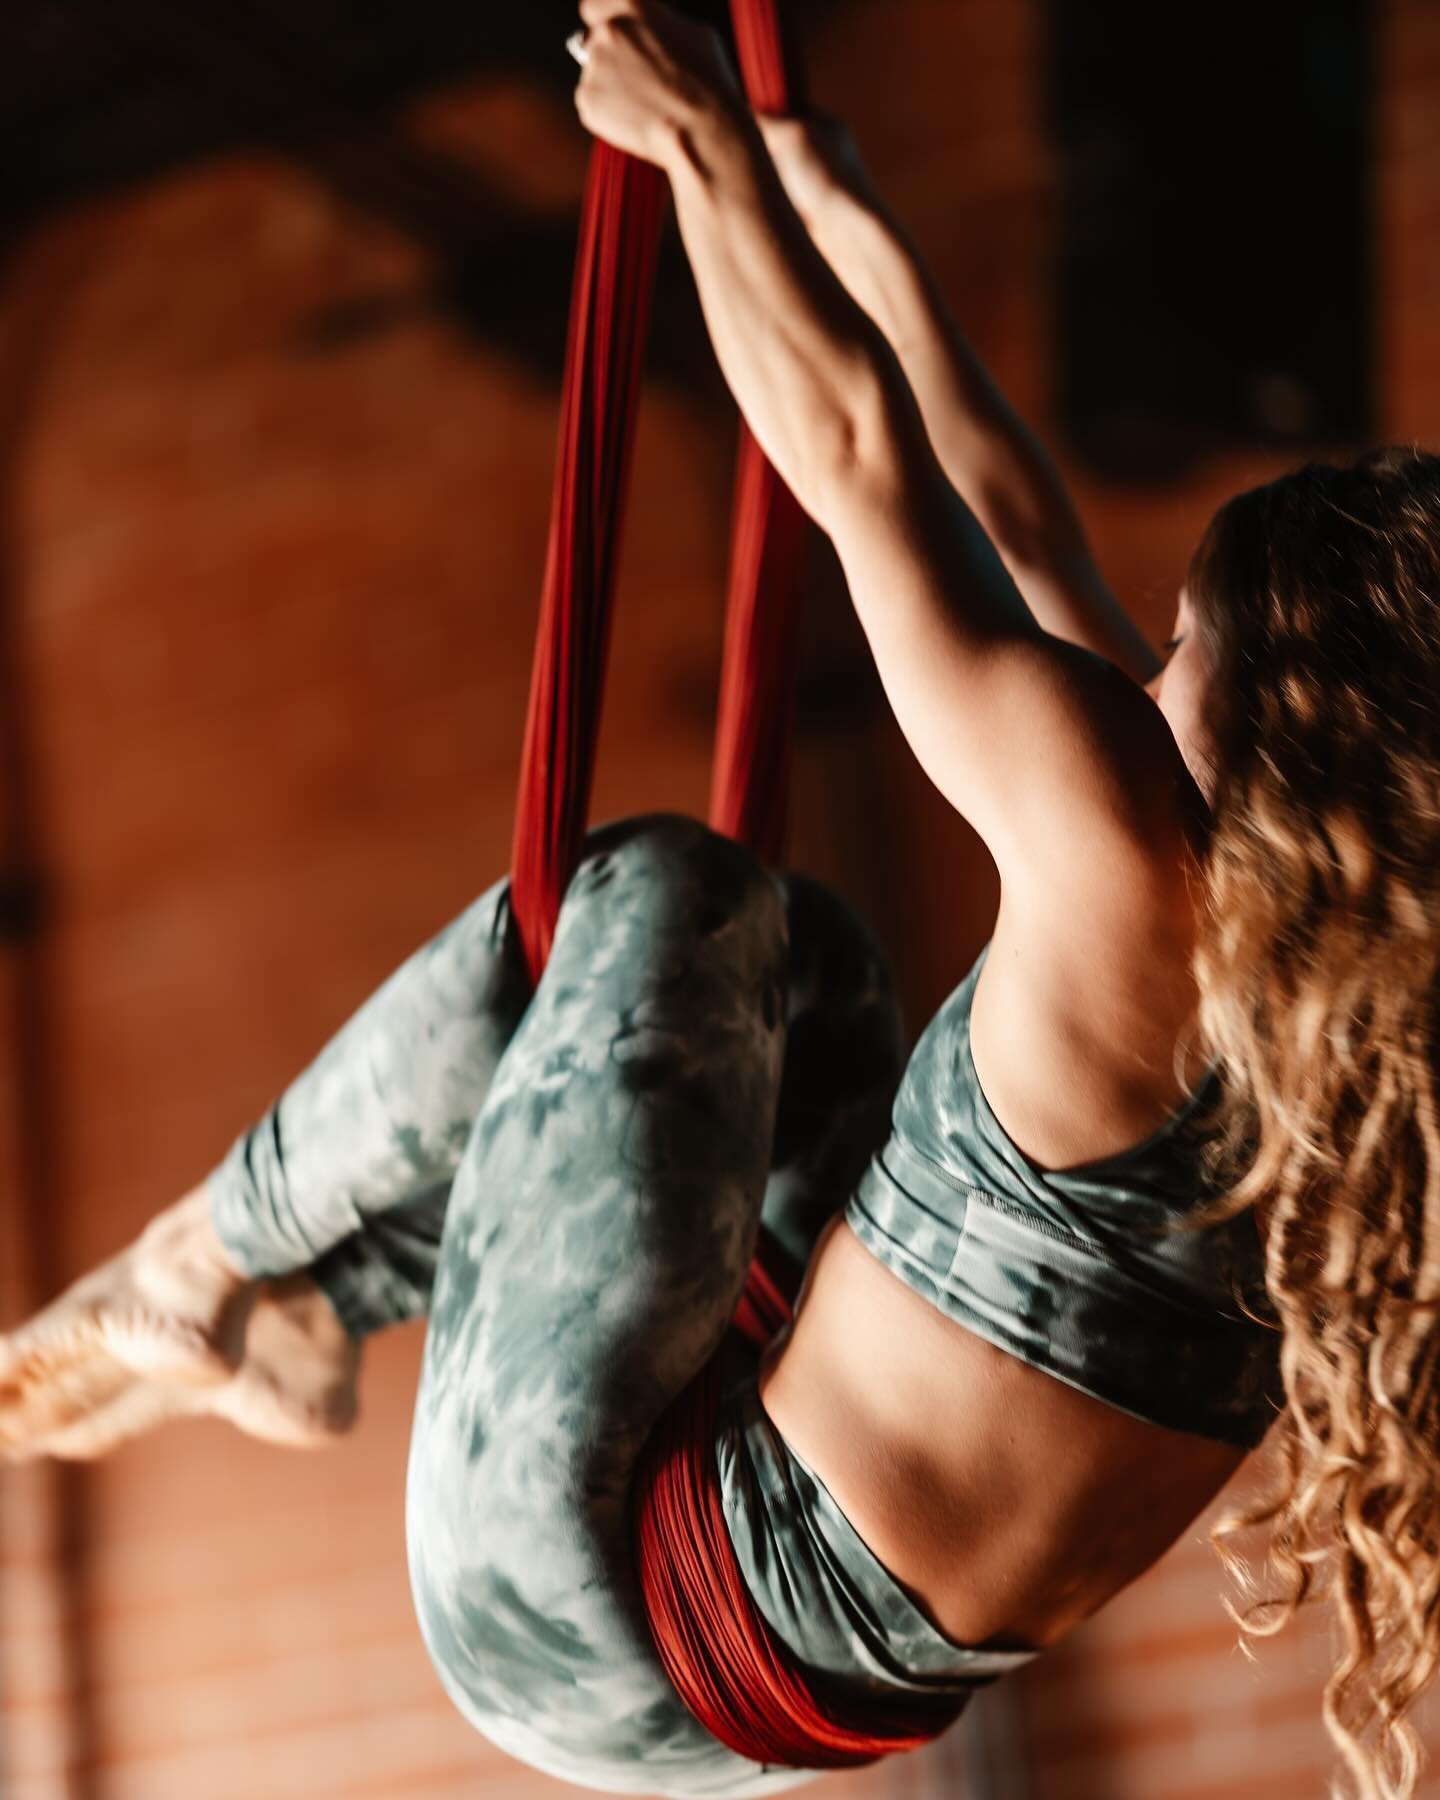 New Class Alert!!!!&nbsp;😃🙌⁣⁣ We are adding a variety of new Aerial Yoga Classes, beginning May 16th! See below👇⁣⁣
⁣⁣
Mondays⁣⁣
7:15pm - Aerial Sunset Flow⁣⁣
⁣⁣
Thursdays⁣⁣
8am - $10 Aerial Flow⁣⁣
⁣⁣
Fridays⁣⁣
9am - Aerial Level 1⁣⁣
⁣⁣
Saturdays⁣⁣